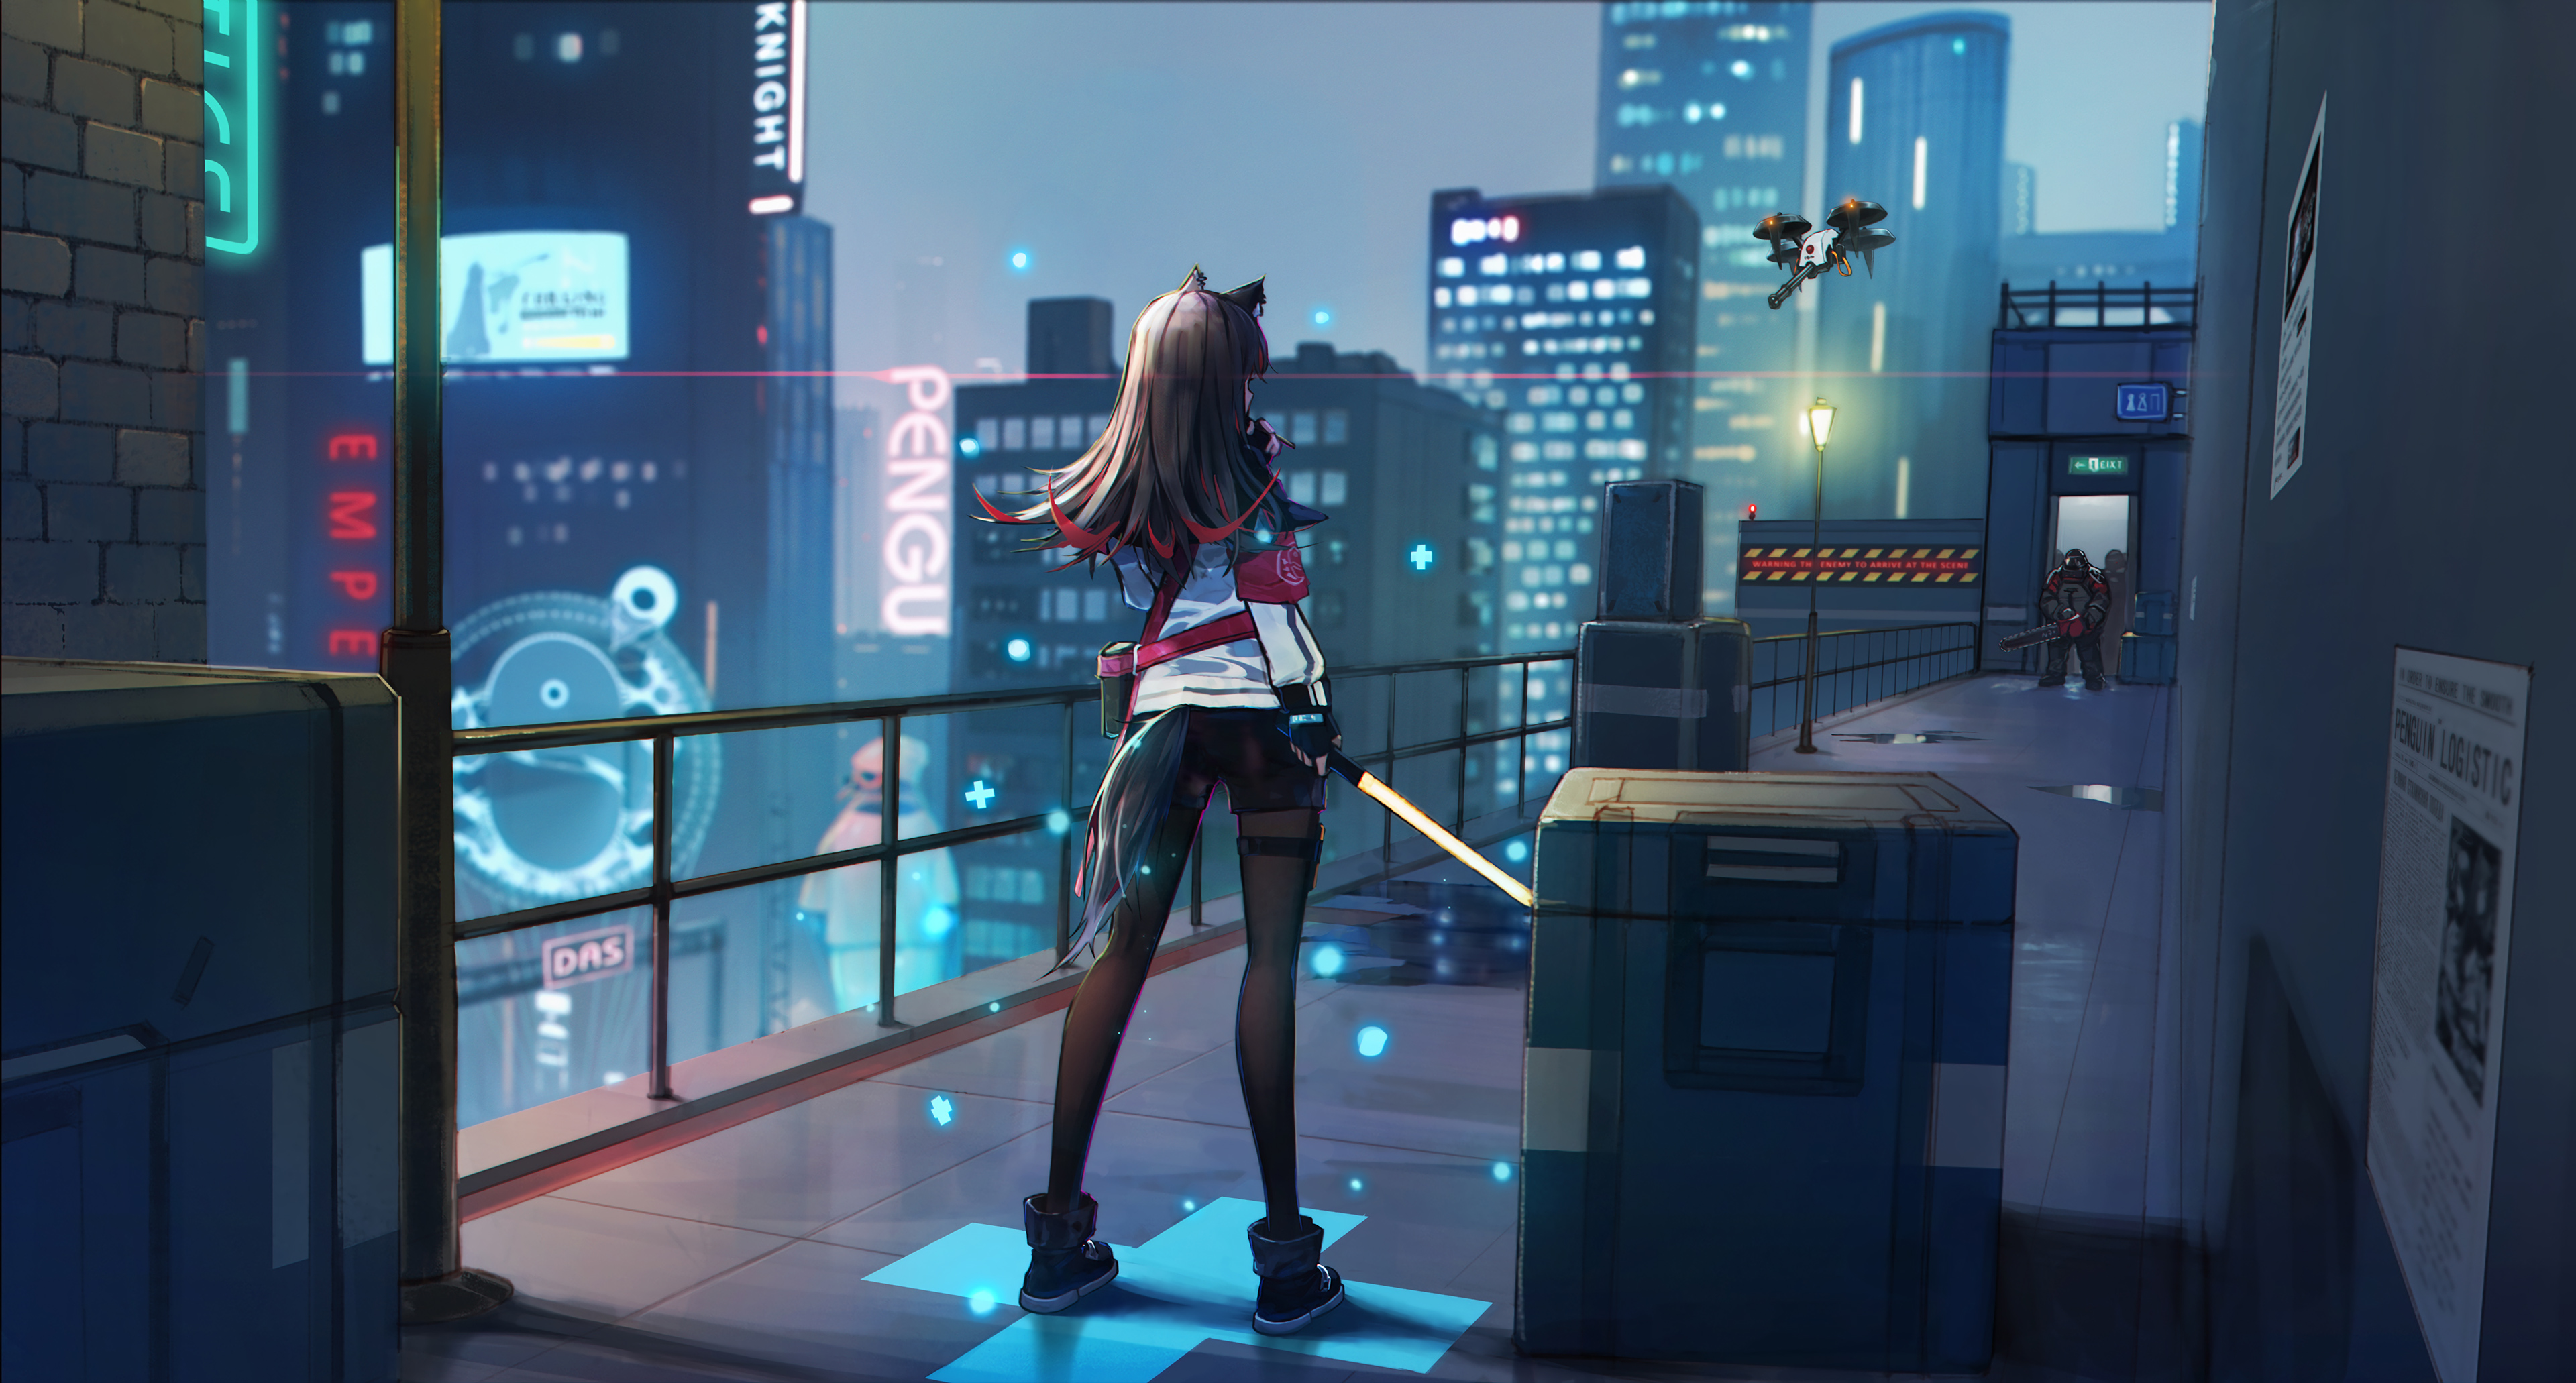 Wallpaper ID: 173123 / pretty, house, blond, home, umbrella, adorable,  sweet, nice, anime, hot, anime girl, scenery, long hair, night, female, roof,  lovely, blonde, blonde hair, sky, sexy, roof top, blond hair,